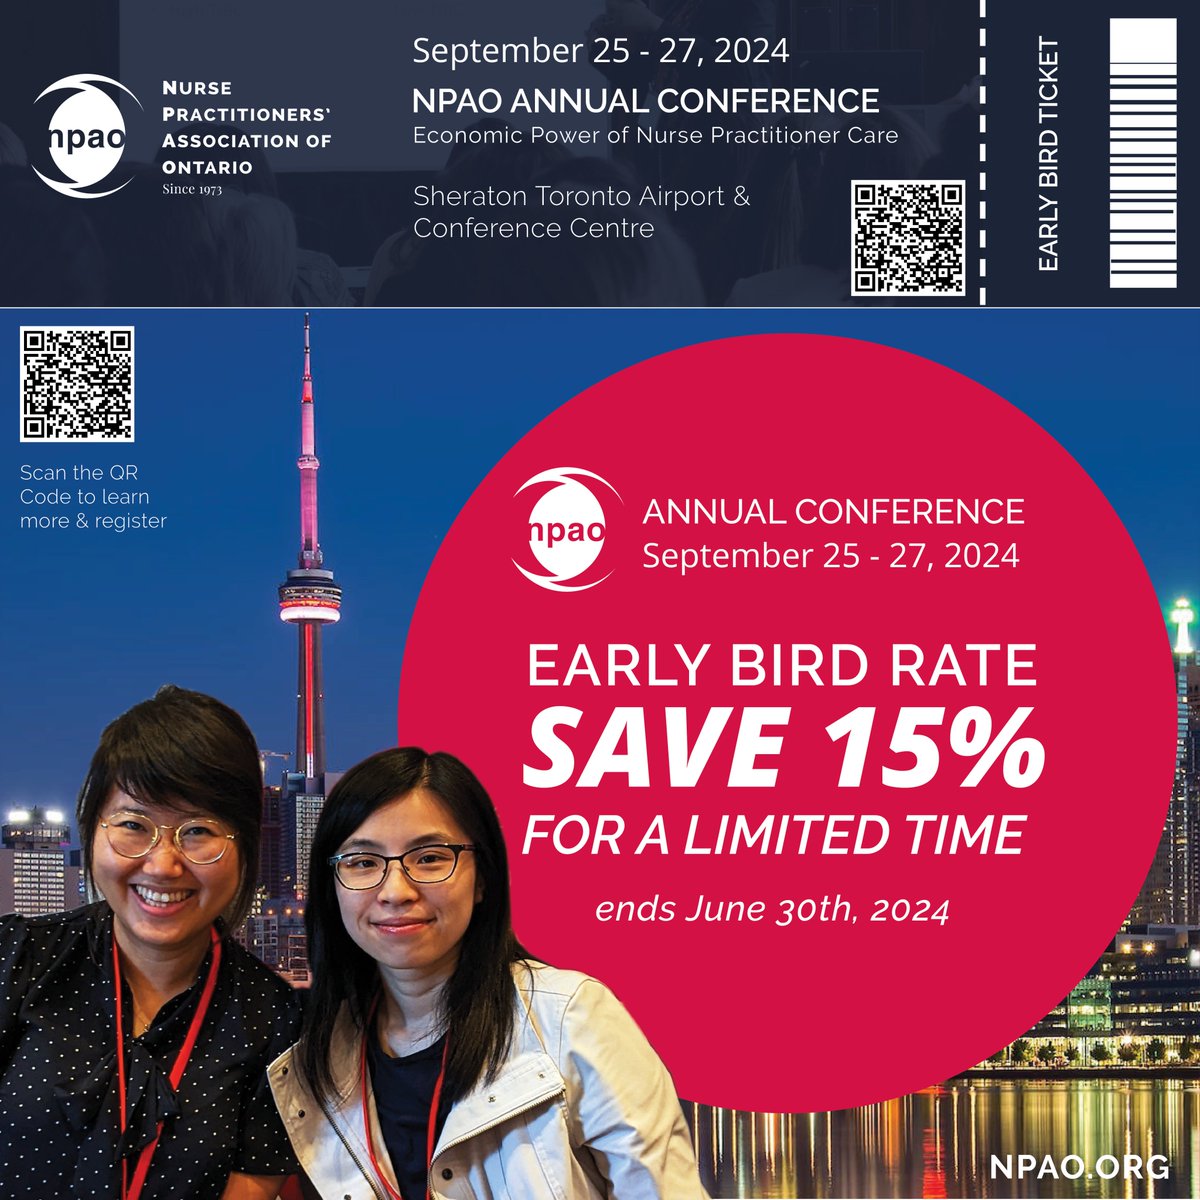 Mark your calendars! Join us at the NPAO Annual Conference on Sept 25-27, 2024 | Theme: Economic Power of Nurse Practitioner Care.✅exclusive insights ✅exhibits & ✅ networking opportunities. Grab your spot now with a limited-time 15% off early bird rate: npao.org/events-educati…